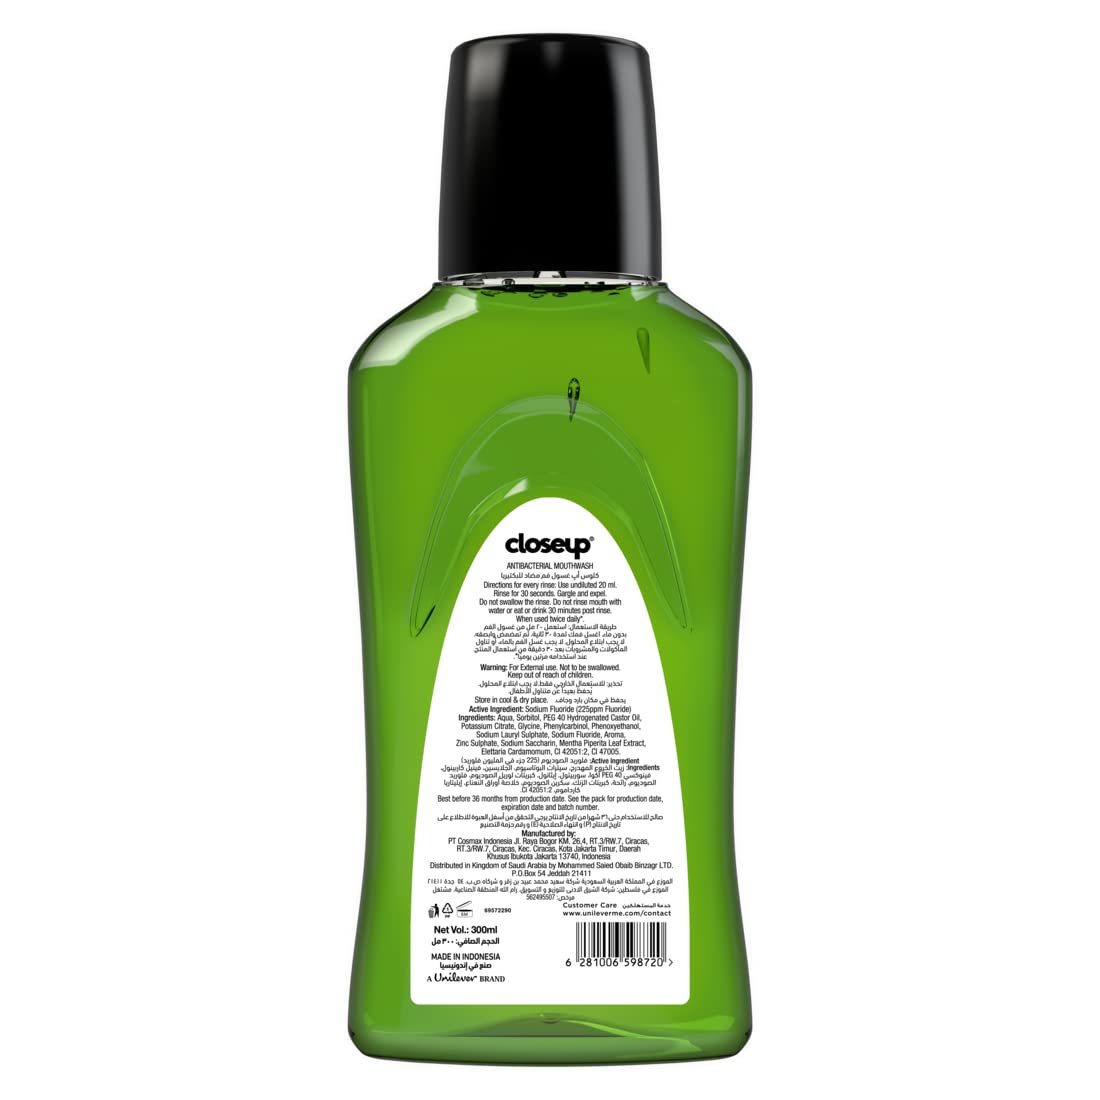 Closeup Antibacterial Mouthwash, for Long Lasting Freshness, Menthol Paradise, Protects Against Bacteria, 300ml